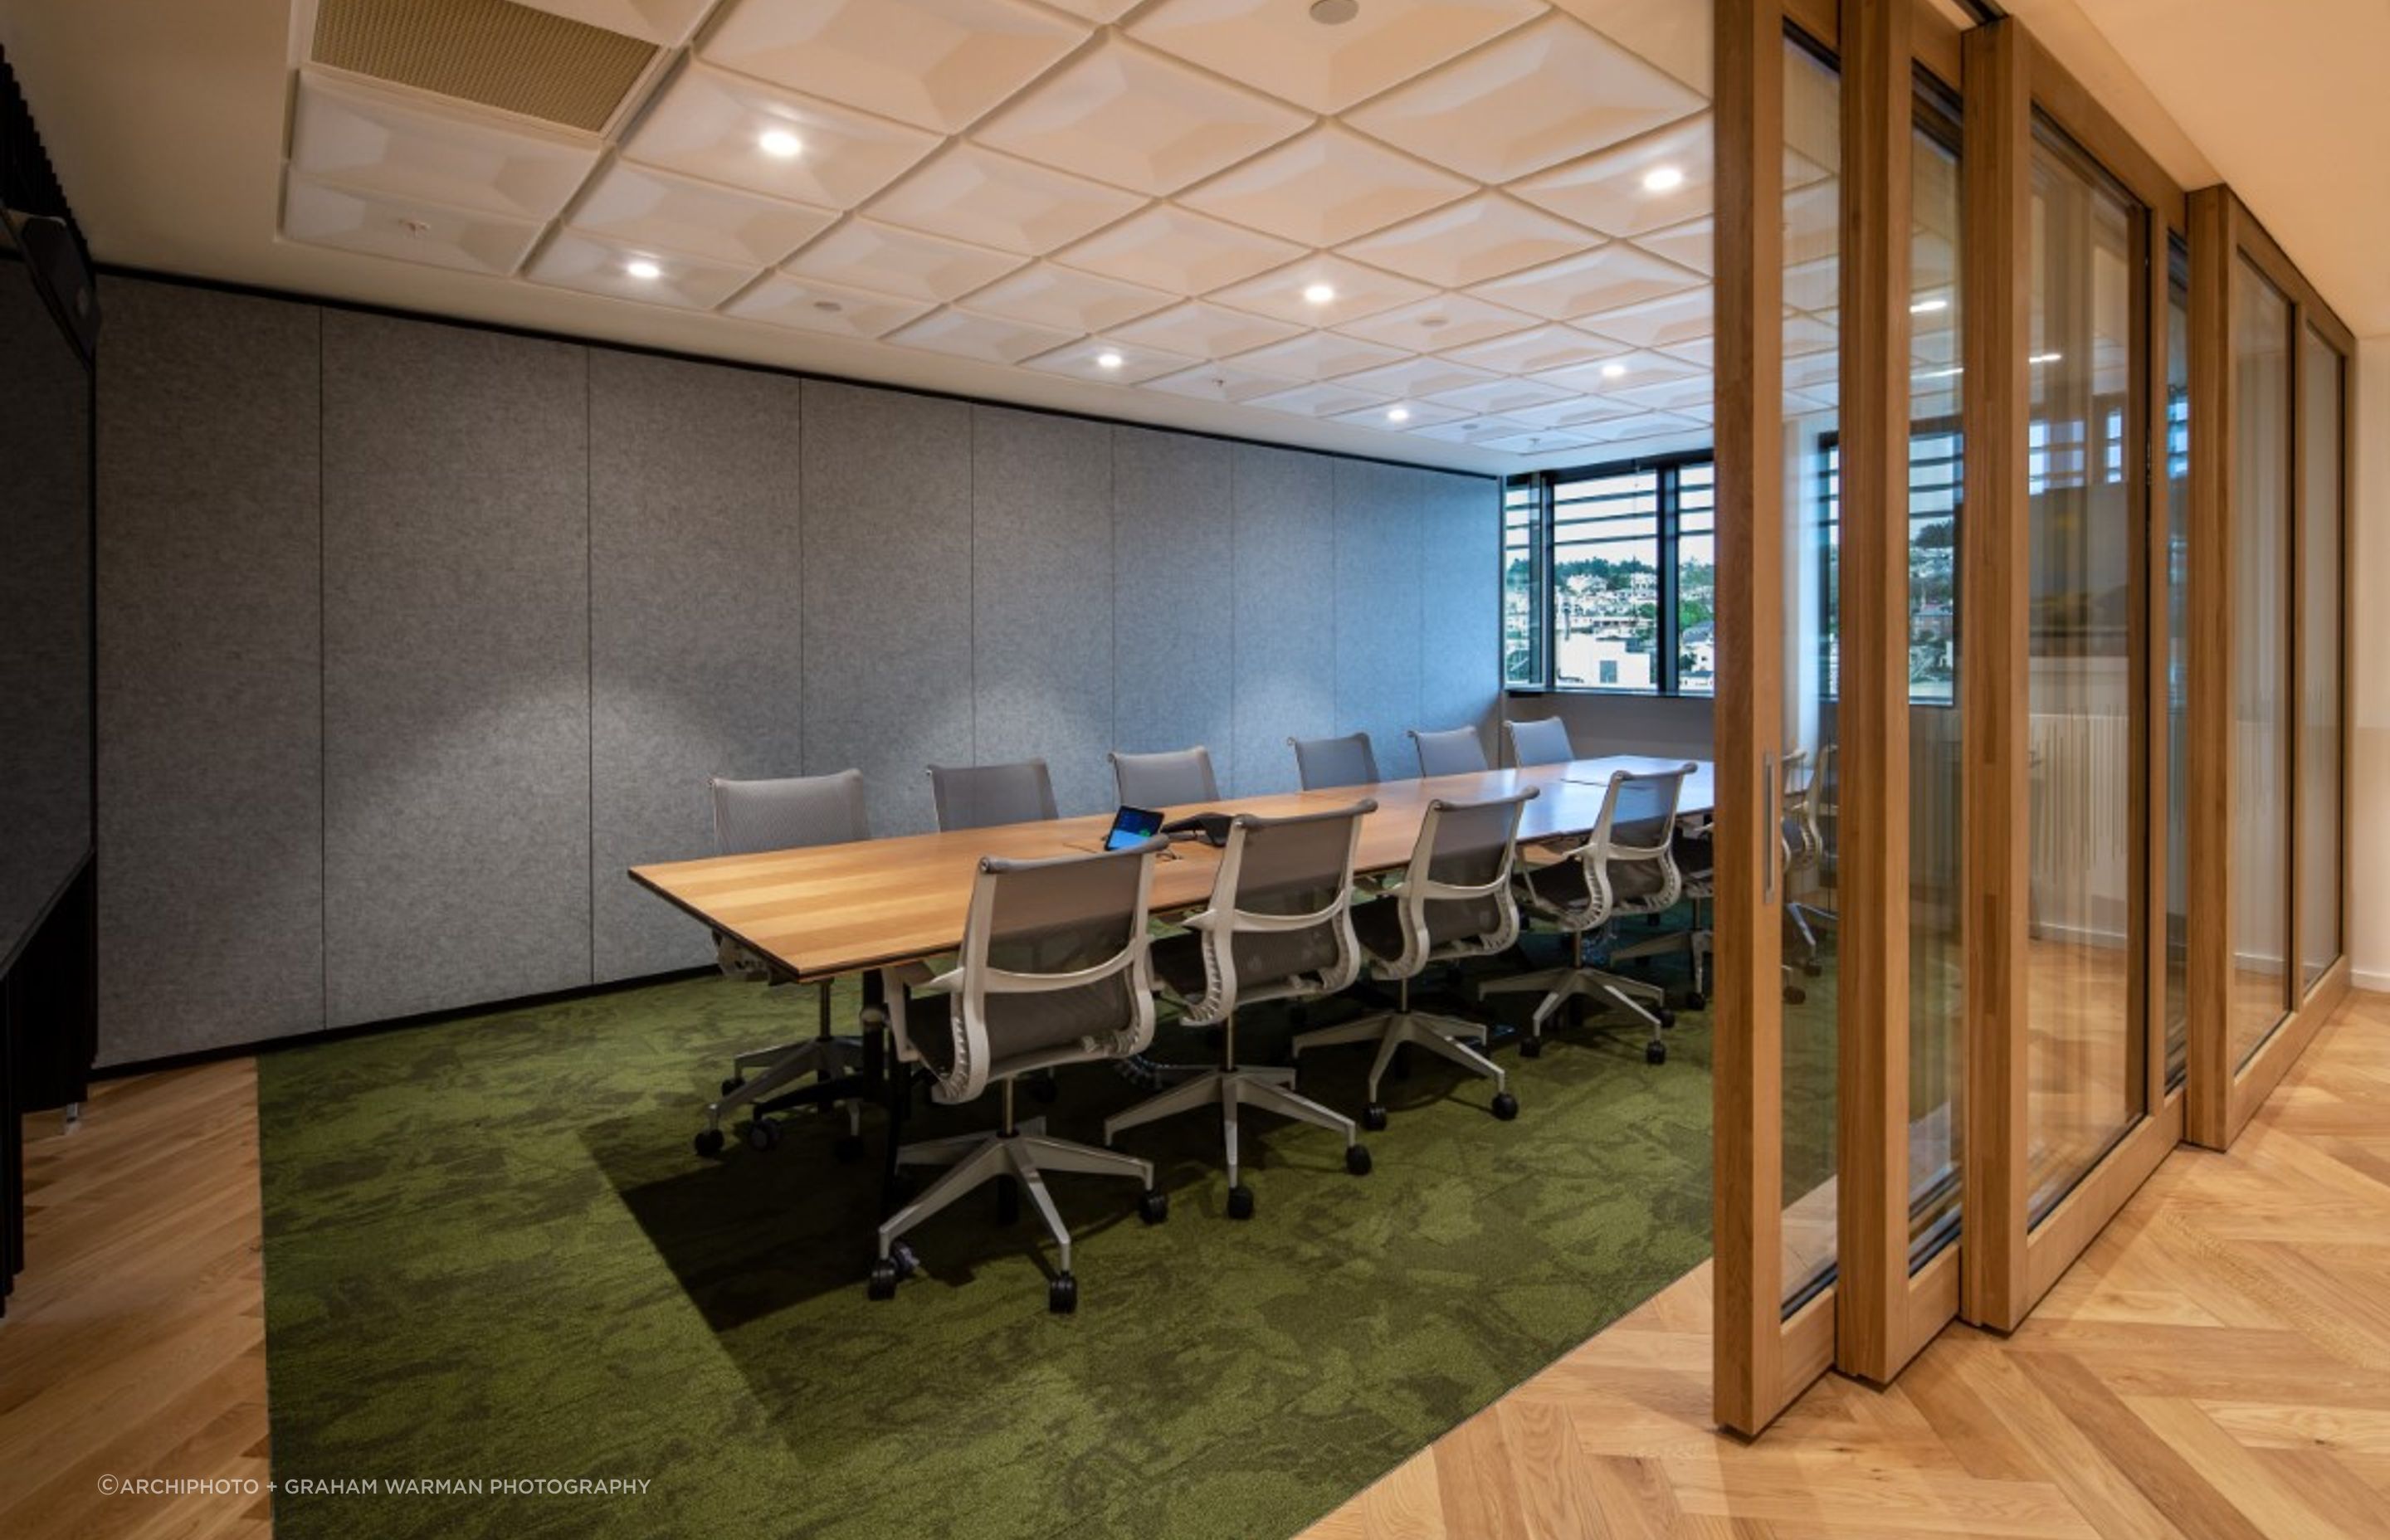 Conference Room  - closed operable wall